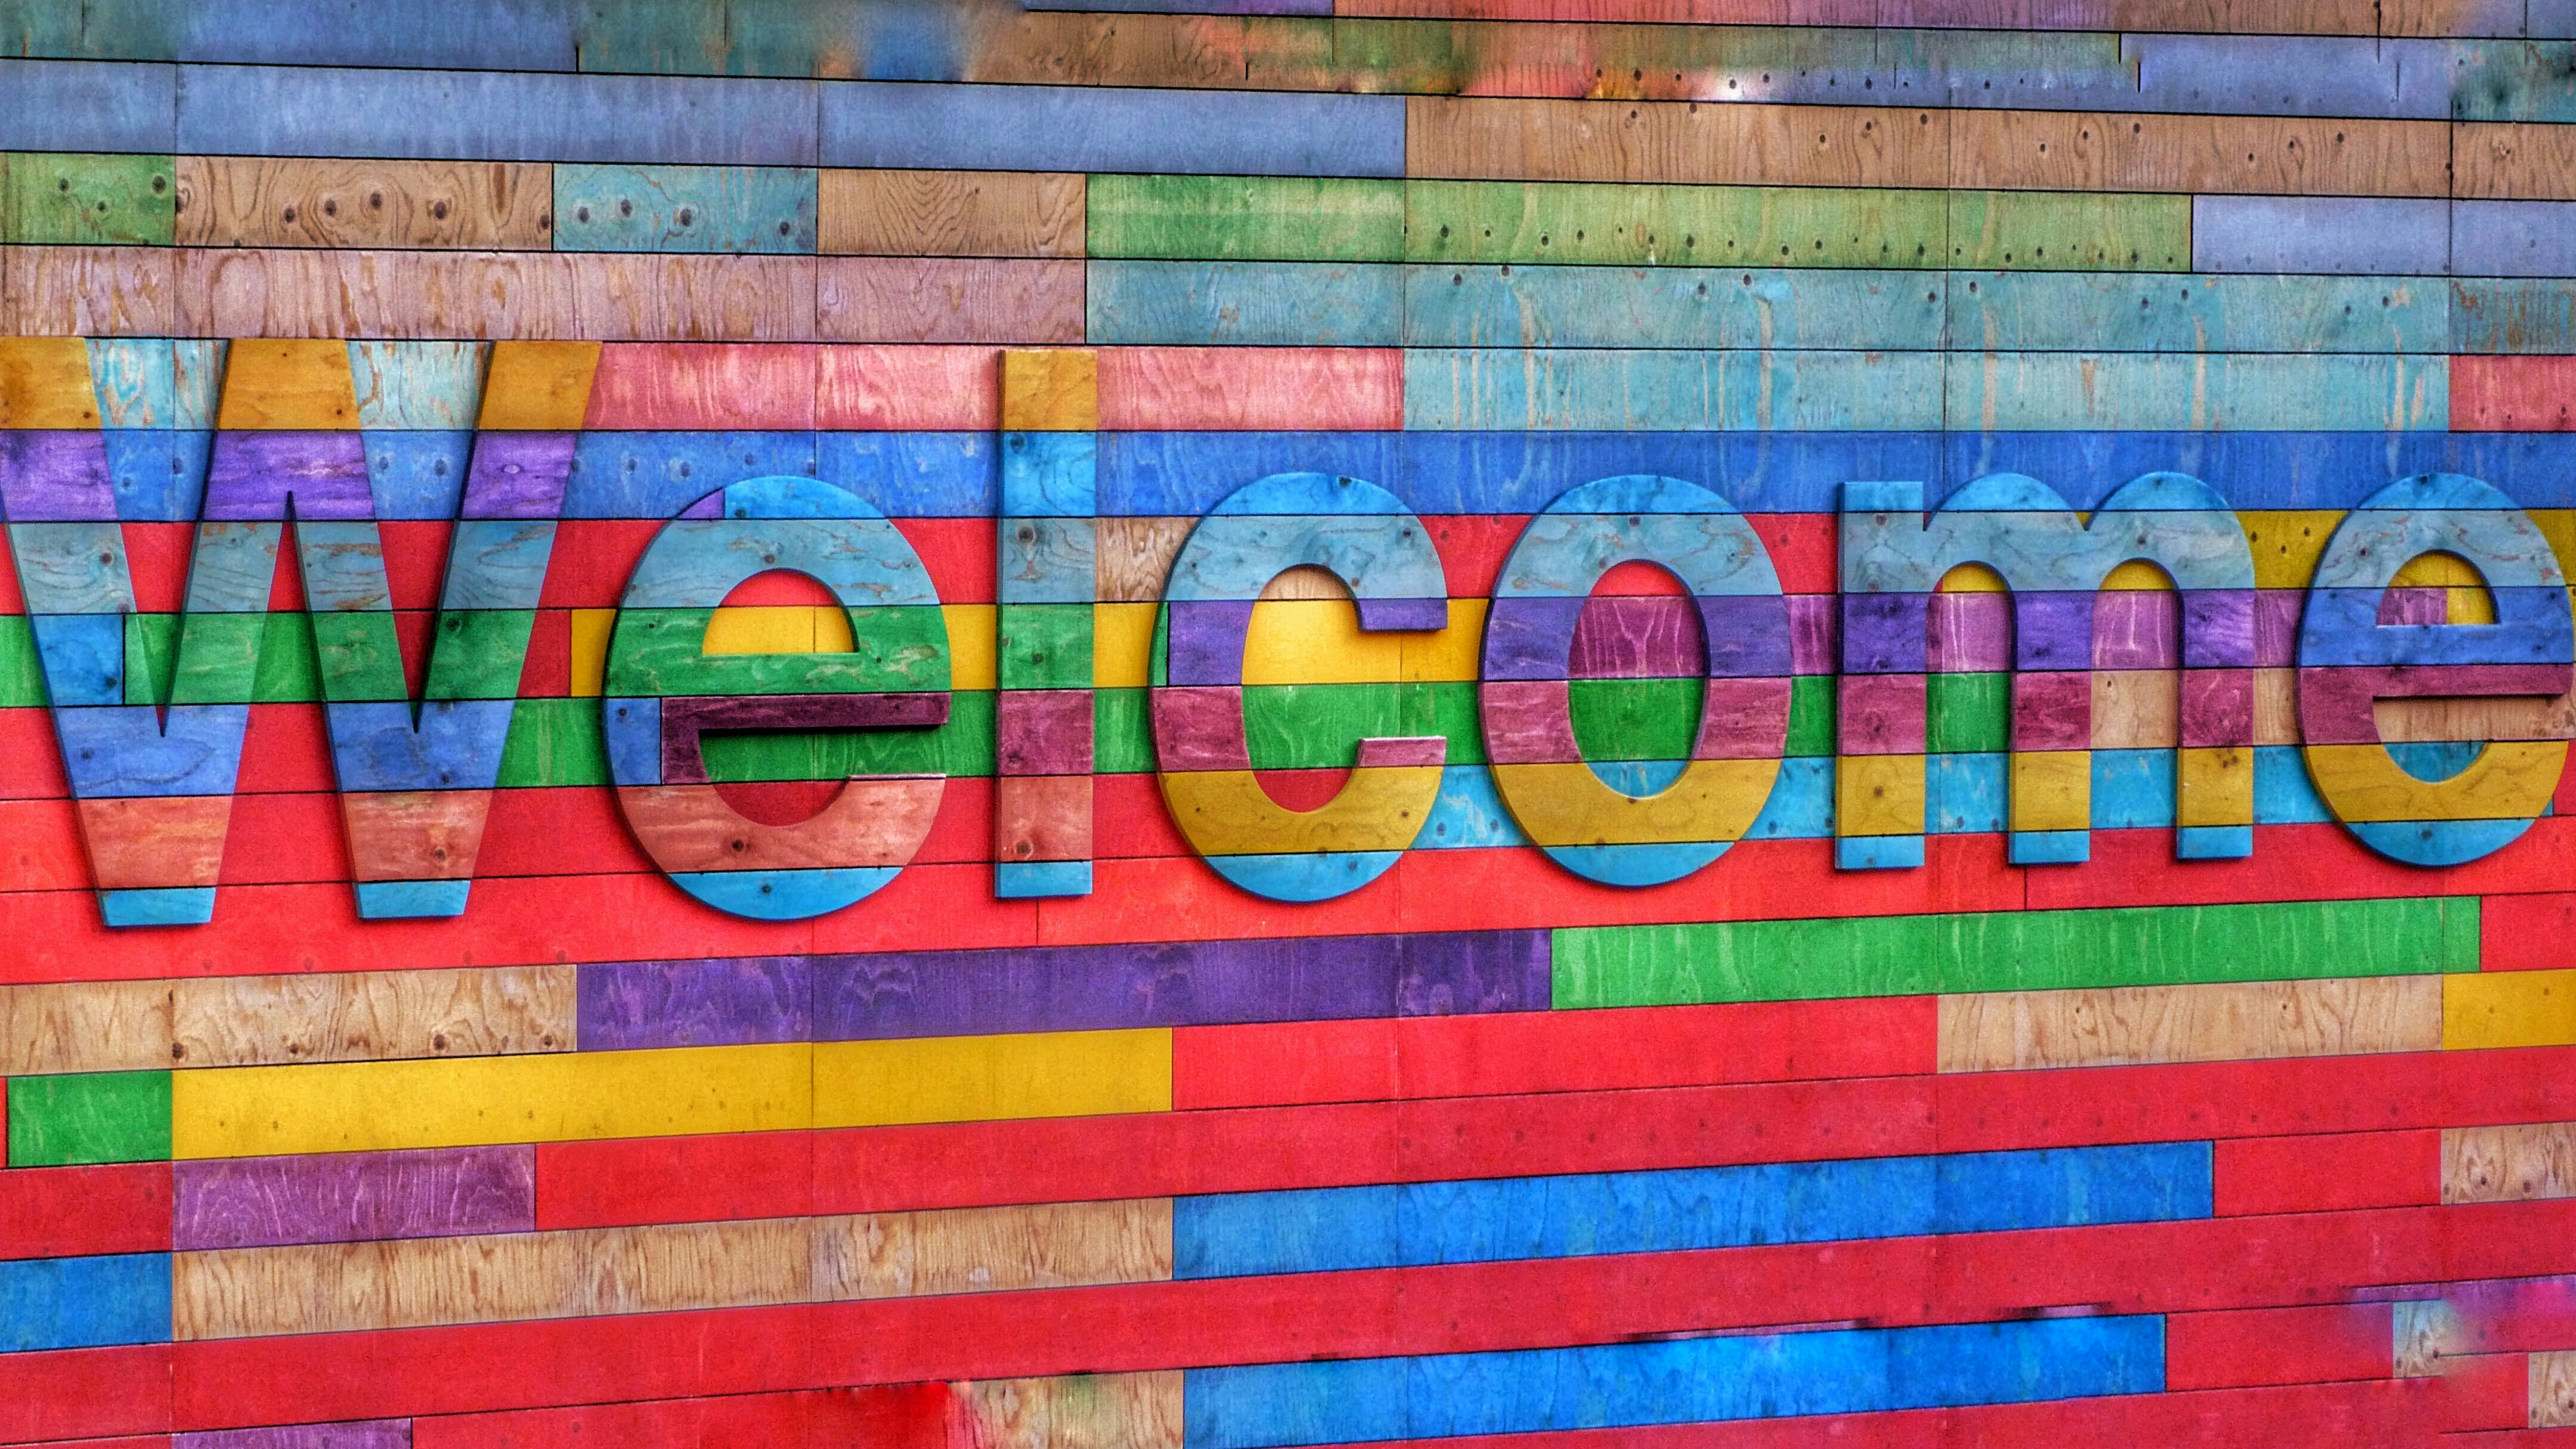 A colourful and welcoming sign that would make the majority of us feel welcome. Colourful and creative and an improvement on a plain wall.